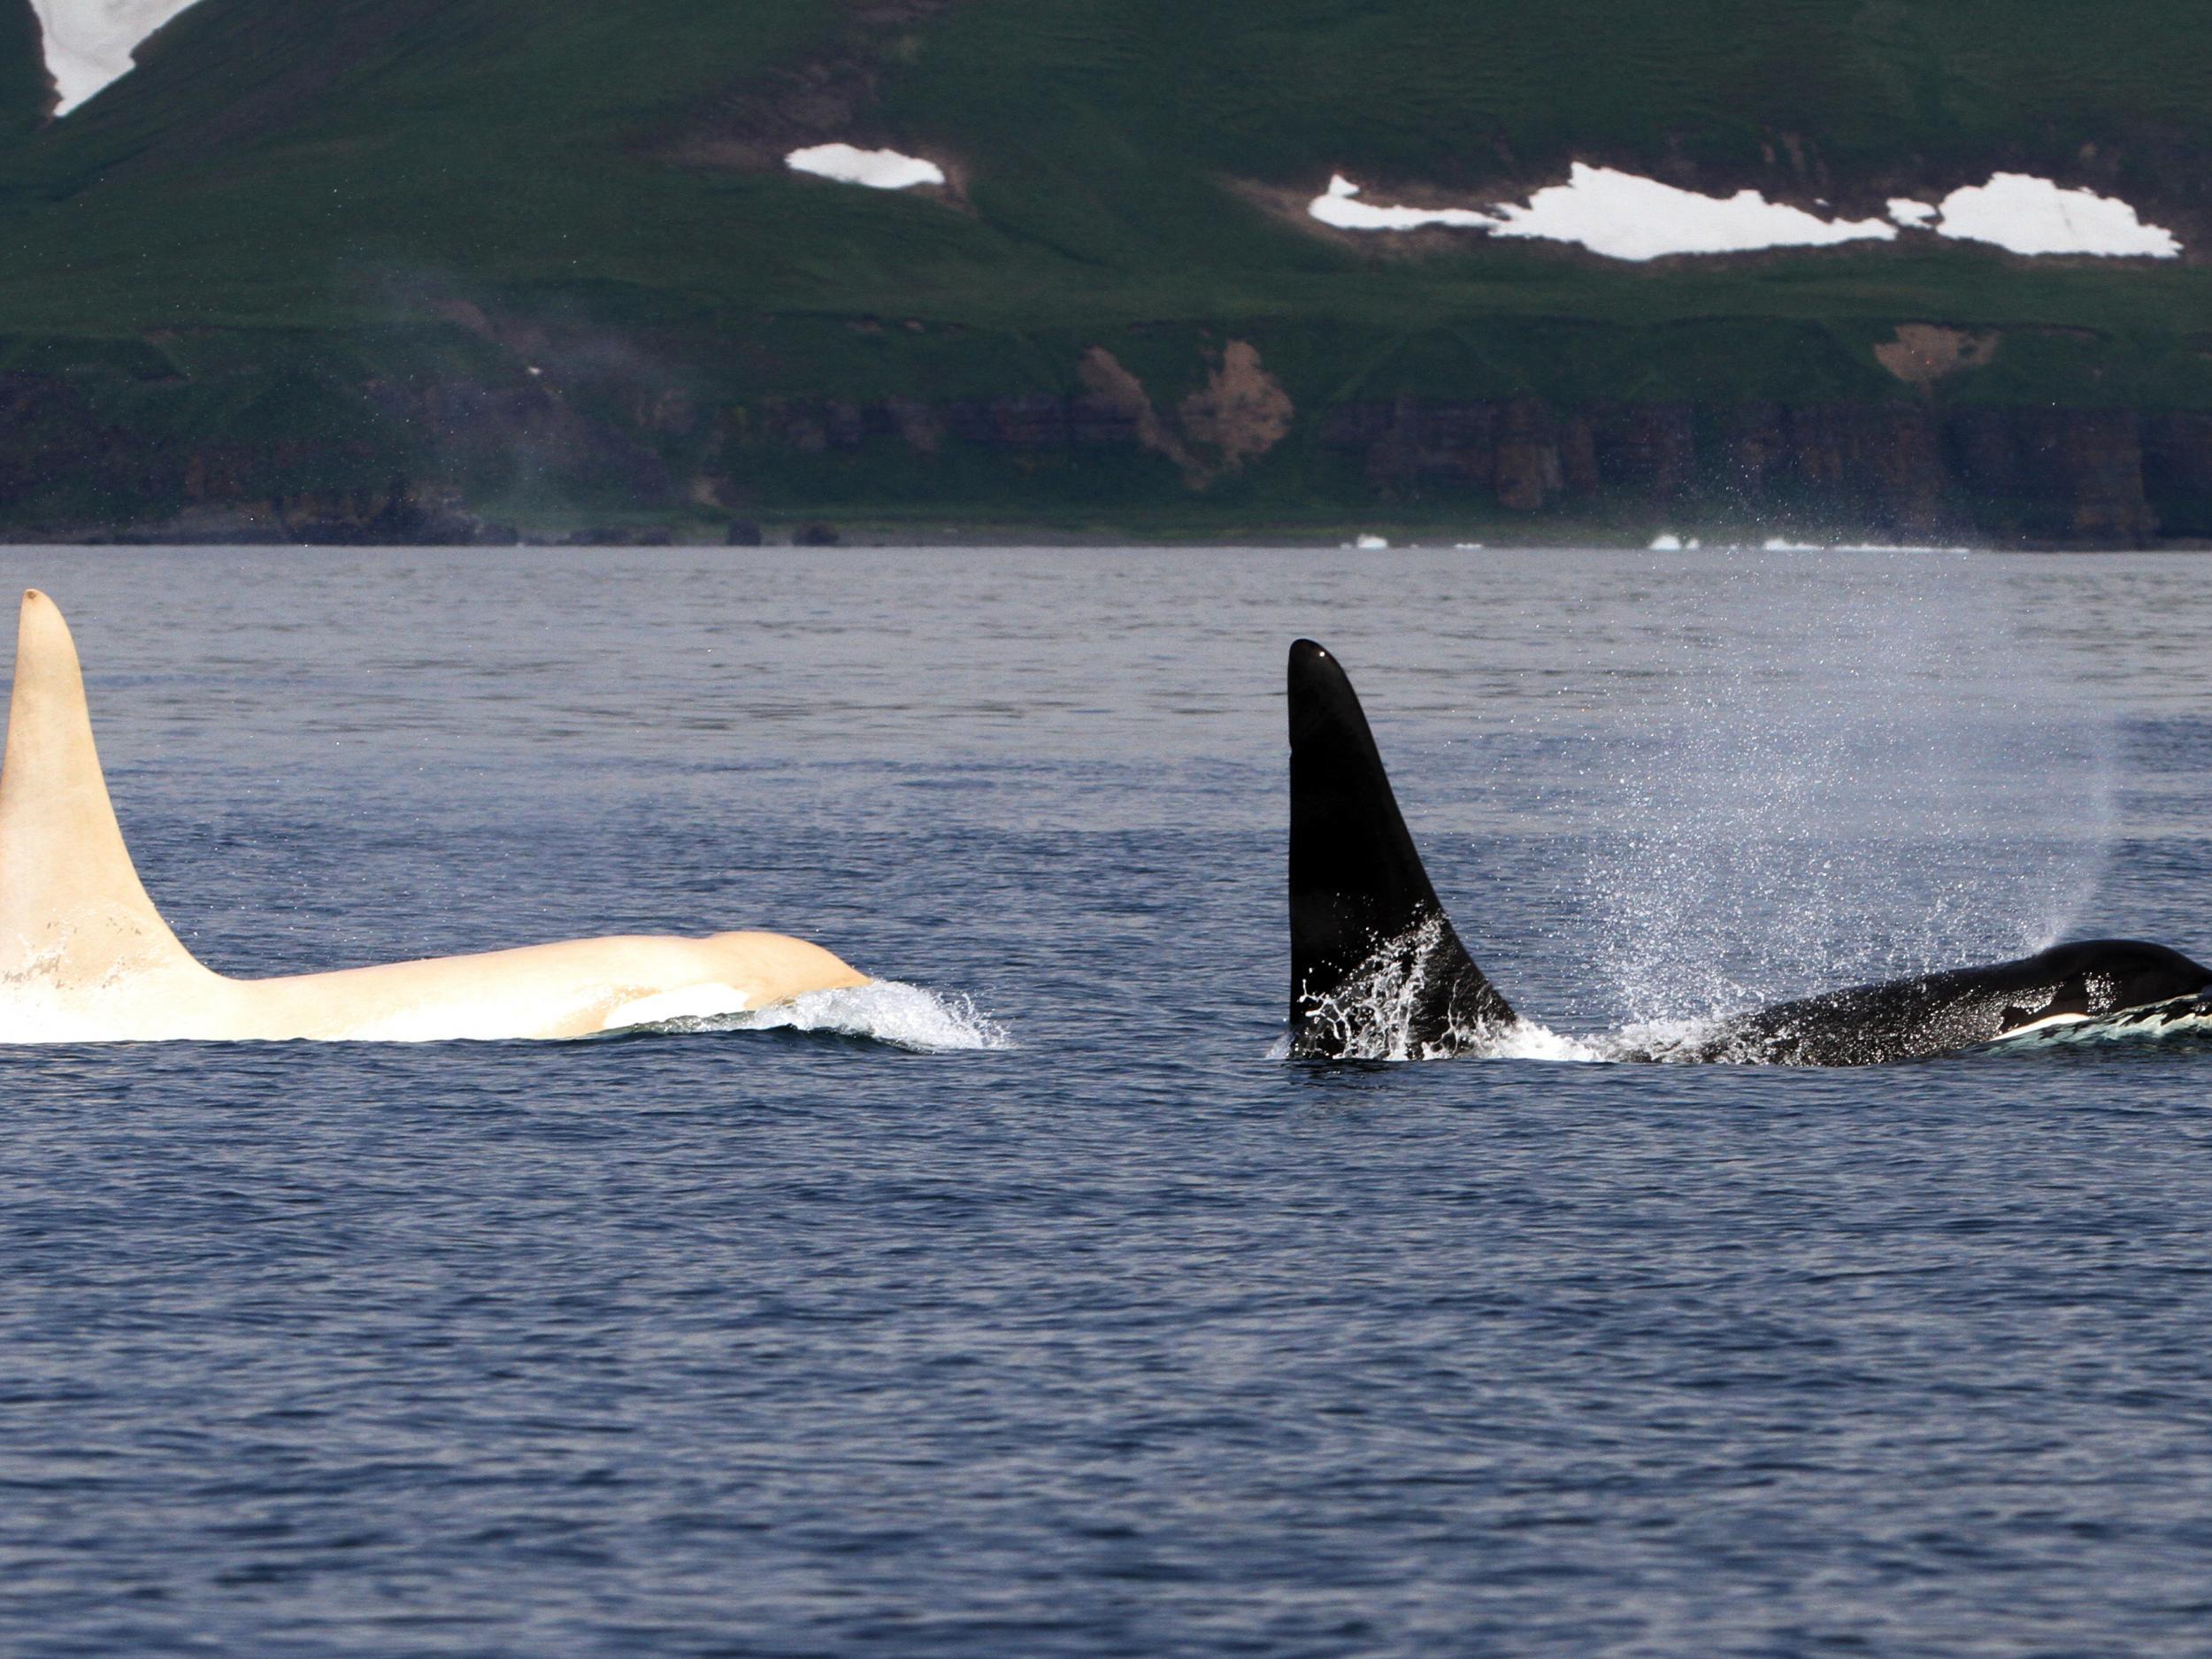 Killer whales, which are found across most of the world, are usually black and white